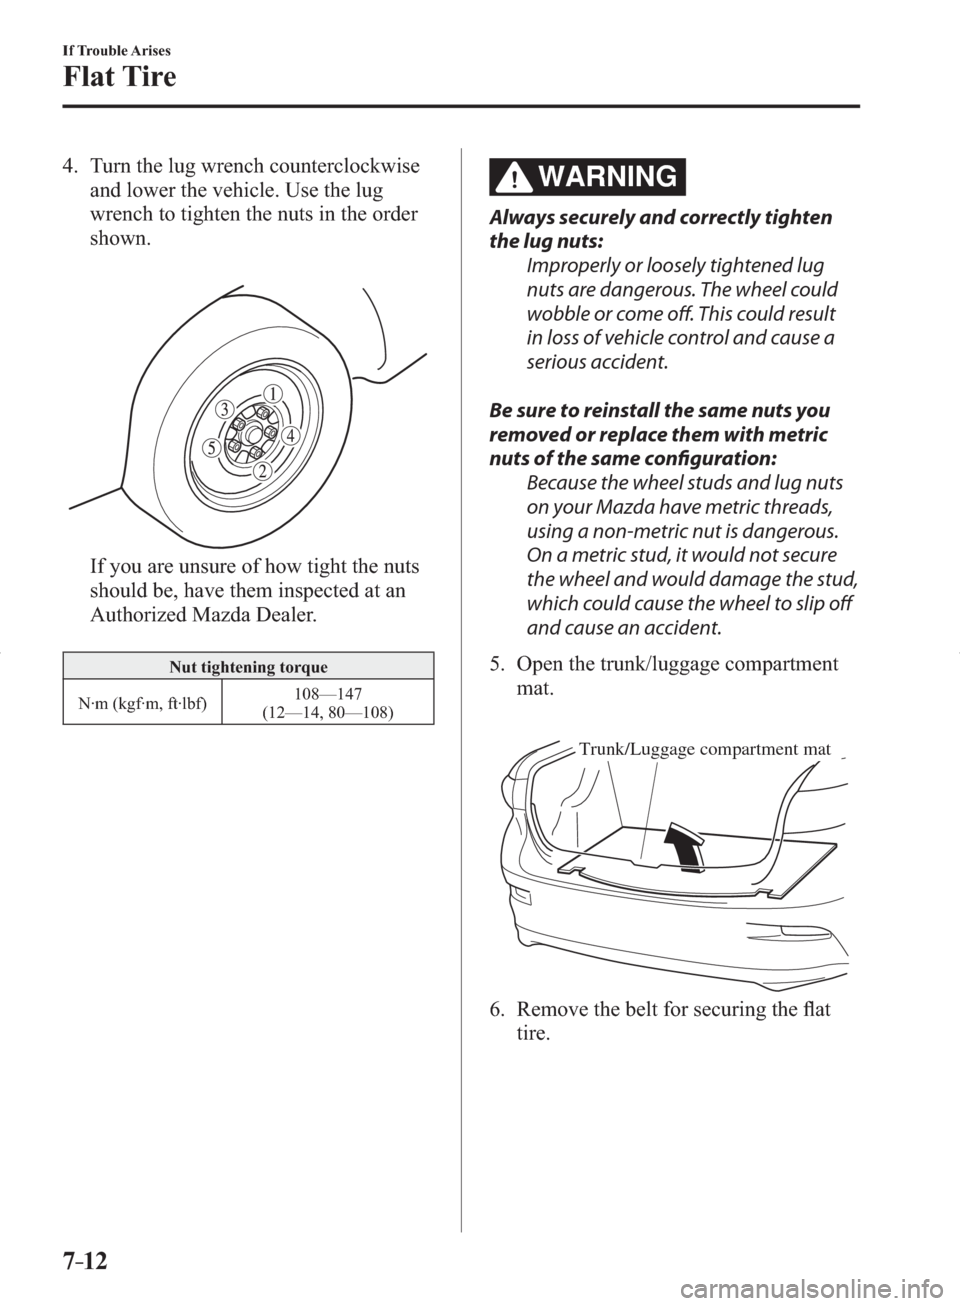 MAZDA MODEL 3 HATCHBACK 2014  Owners Manual (in English) 7–12
If Trouble Arises
Flat Tire
   4.   Turn  the  lug  wrench  counterclockwise 
and lower the vehicle. Use the lug 
wrench to tighten the nuts in the order 
shown.
    If you are unsure of how ti